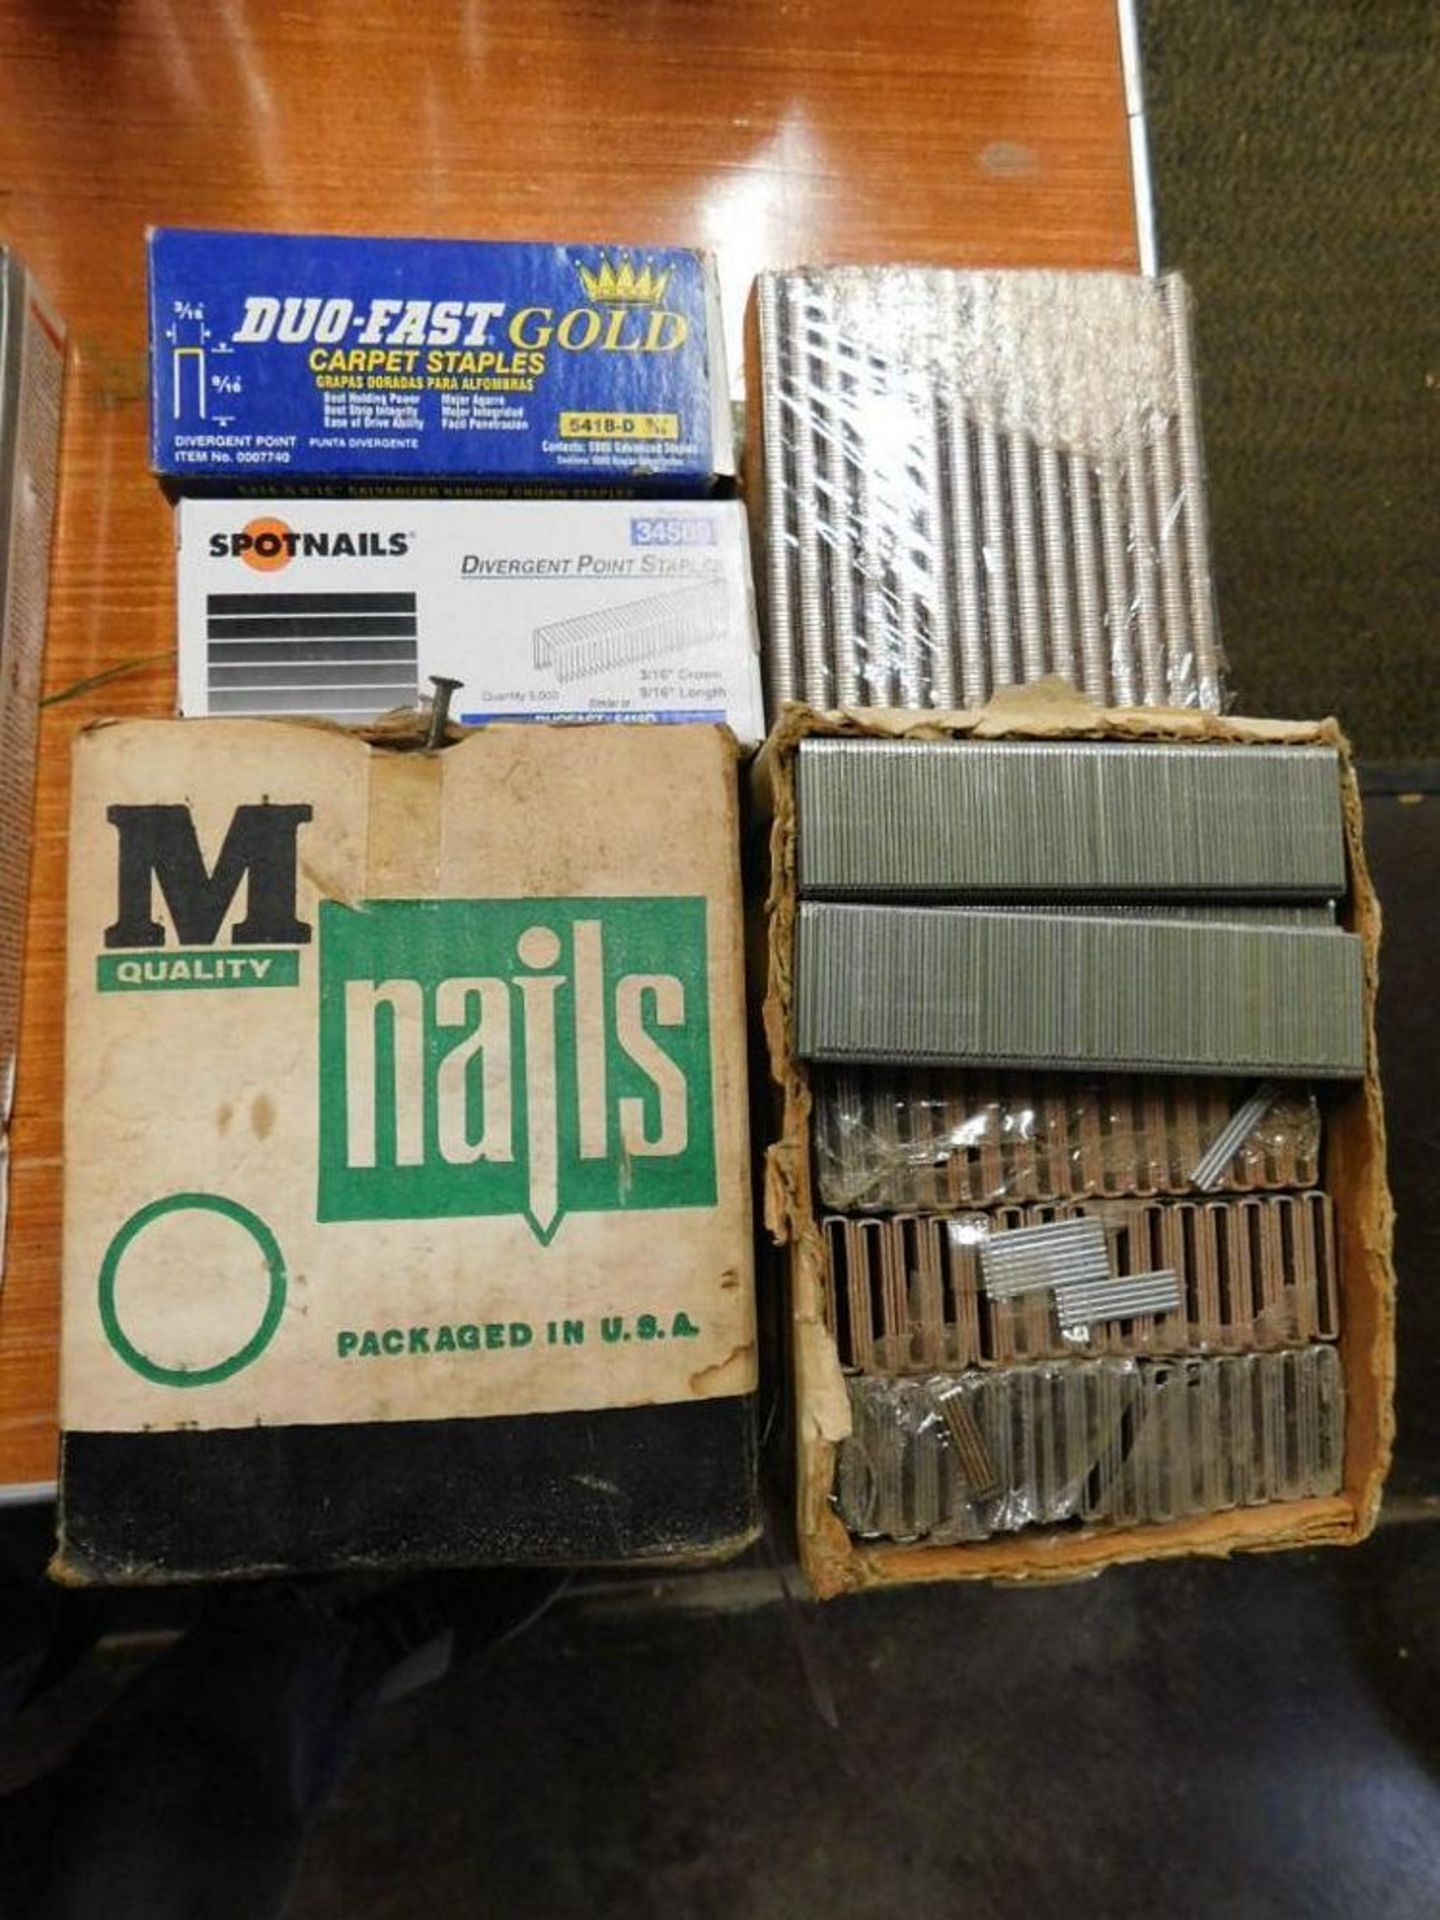 LOT: Assorted Carpet Staples, Staples, Nails (LOCATION: 318 N. Milwaukee Ave., Wheeling, IL 60090)